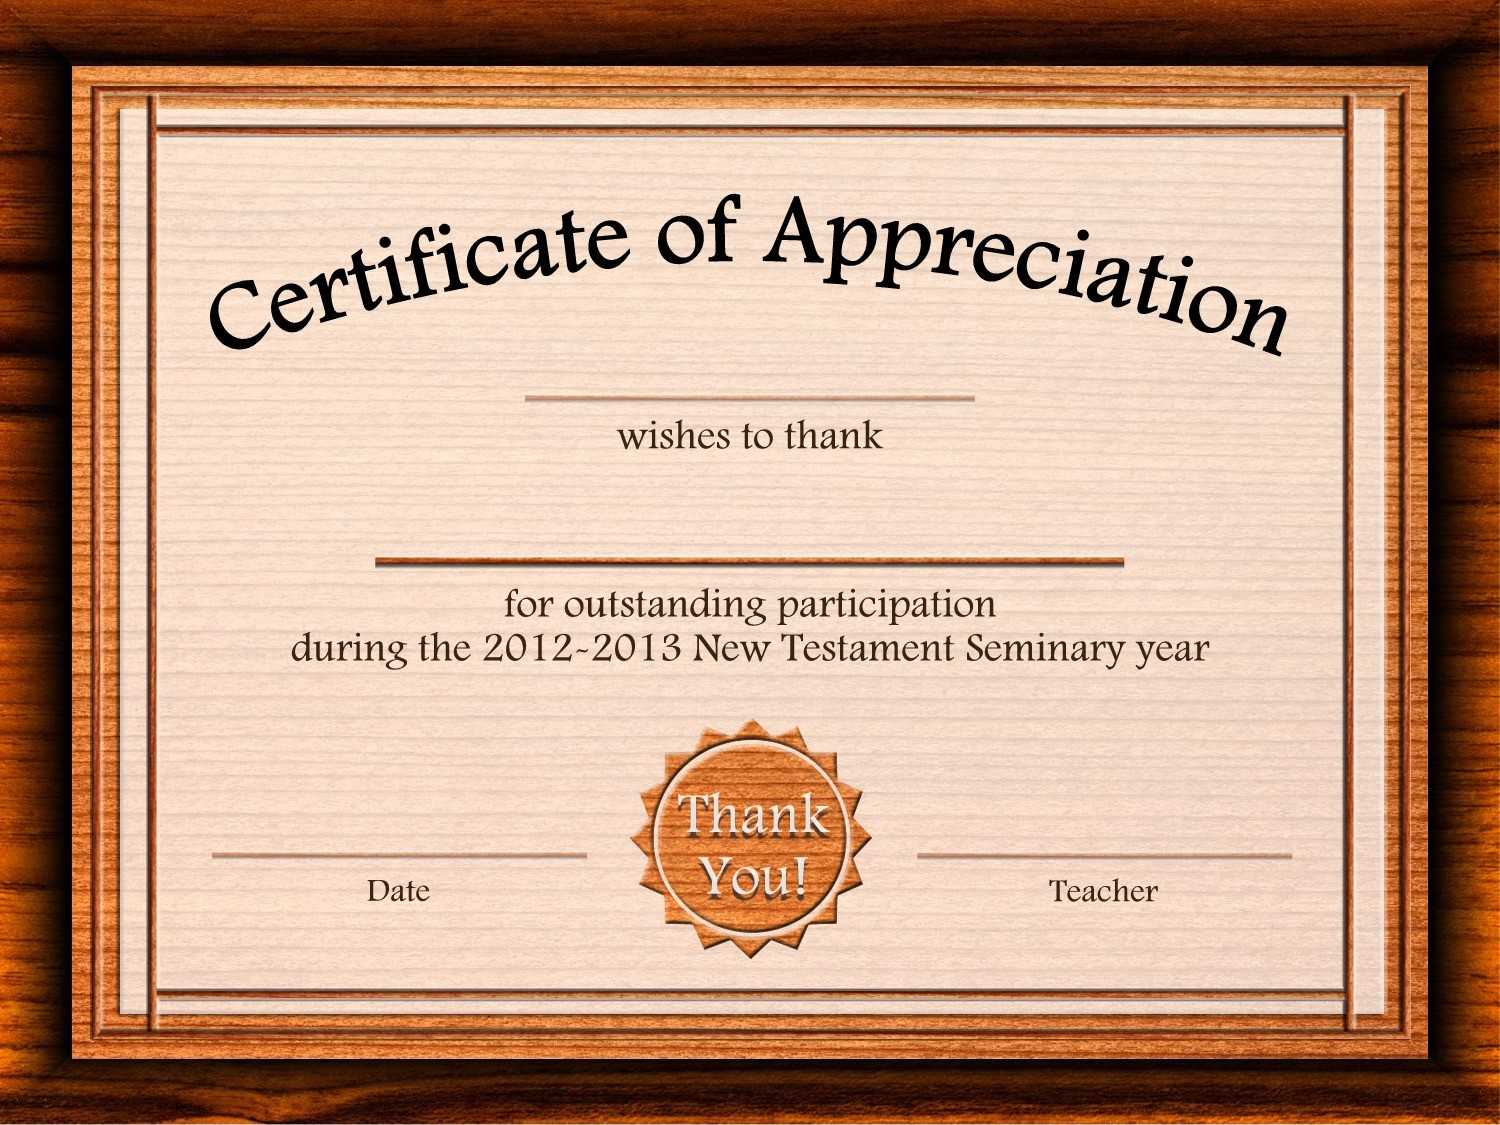 Formal Certificate Of Appreciation Template For The Best Throughout Best Employee Award Certificate Templates